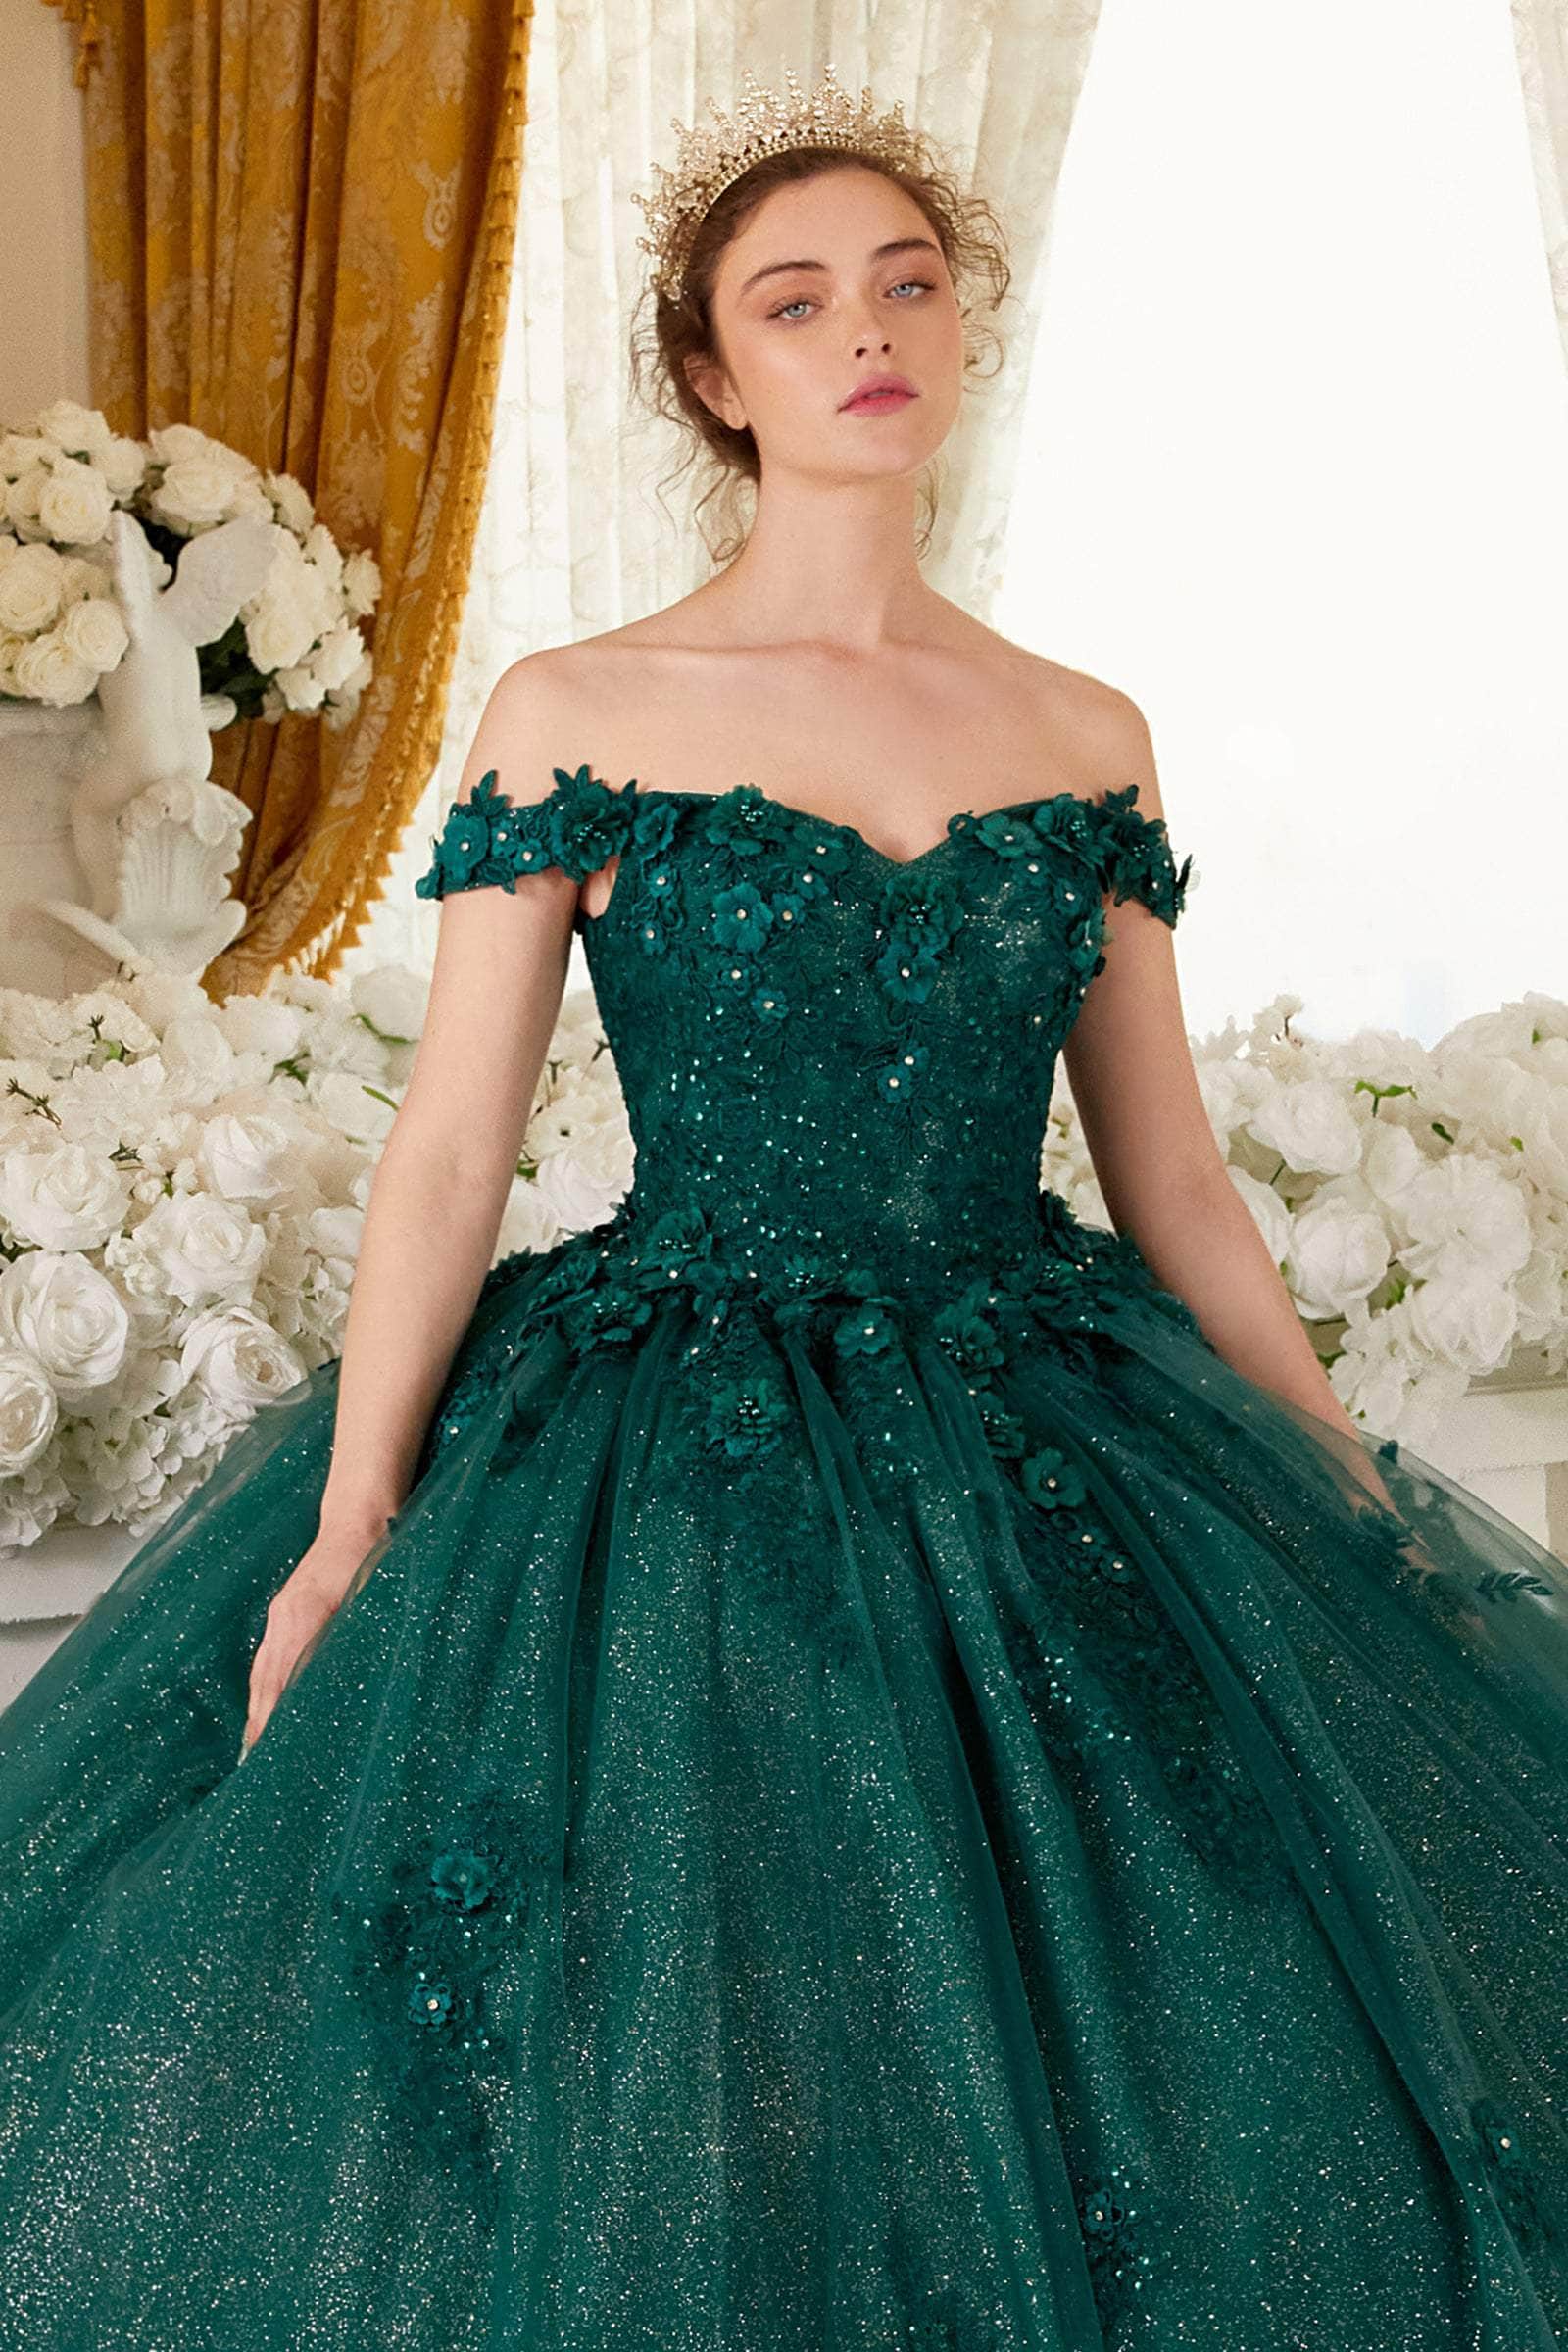 Ladivine 15713 - 3D Floral Applique Embellished Sweetheart Ballgown –  Couture Candy